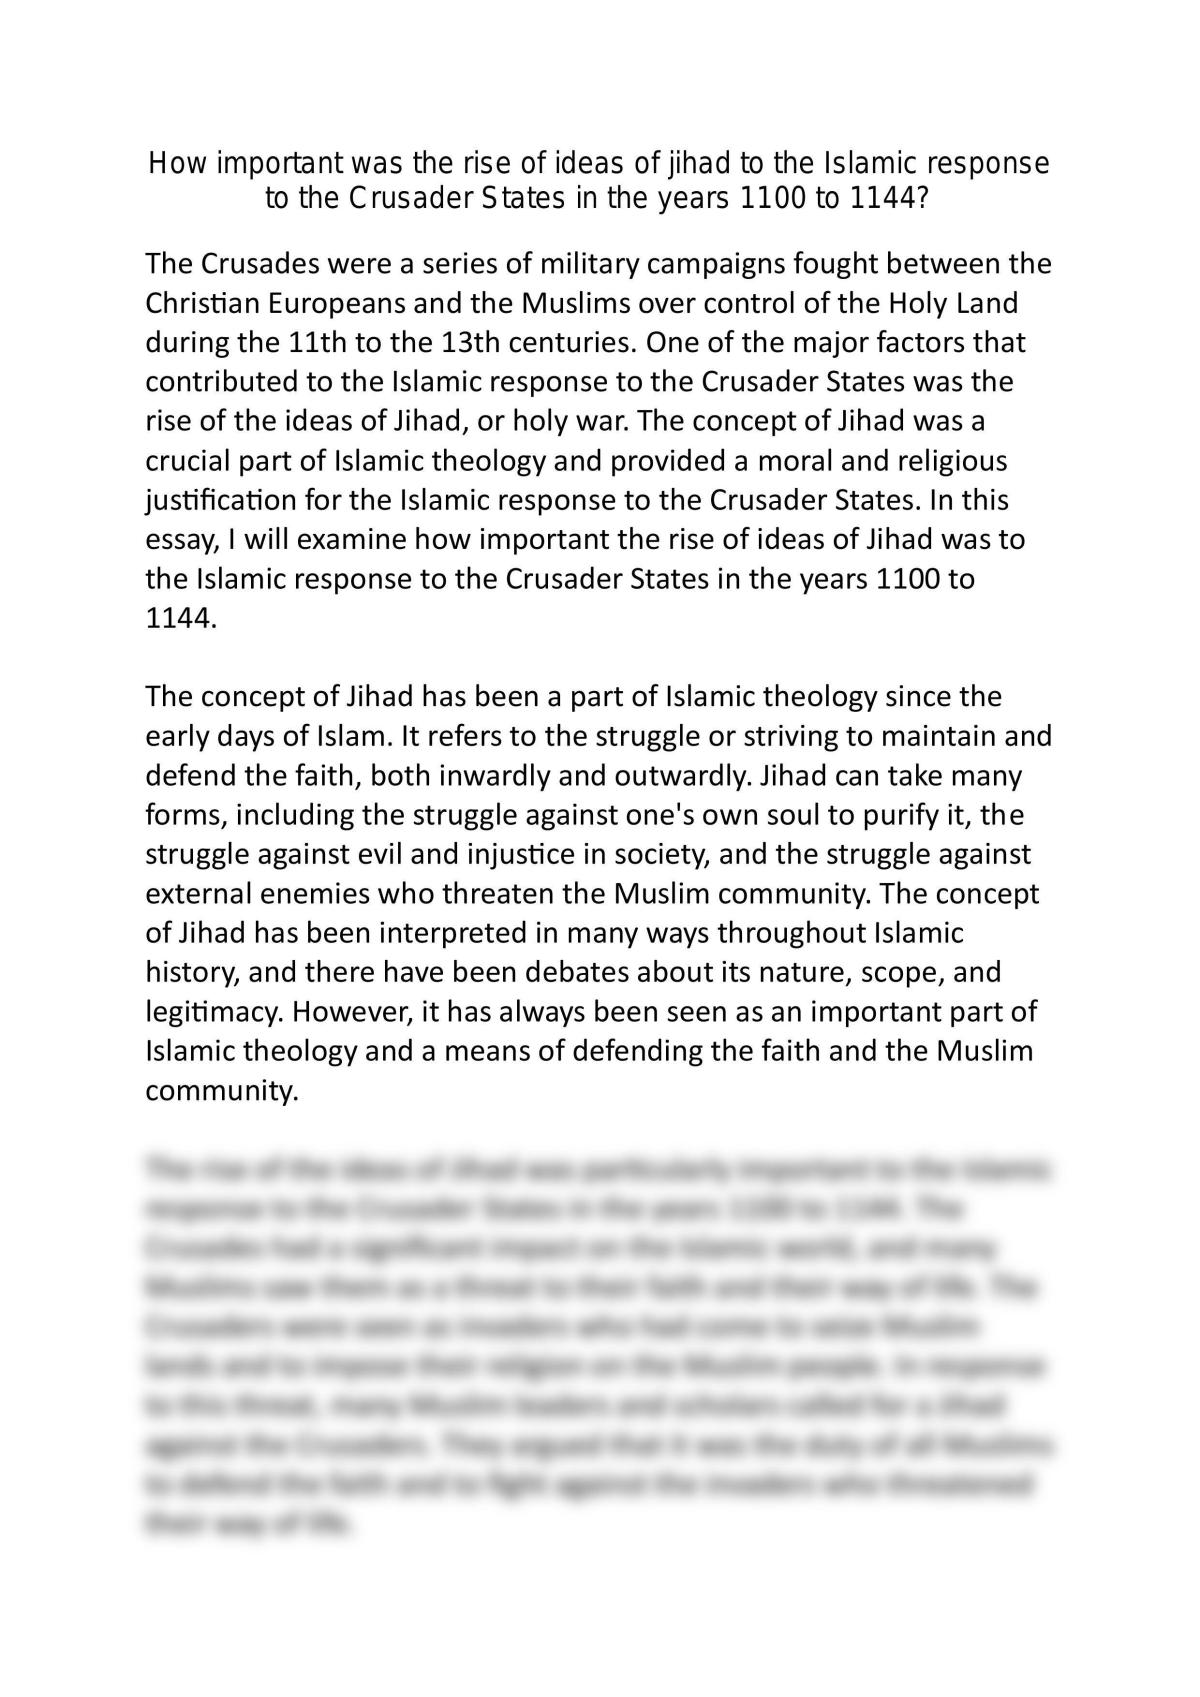 How important was the rise of ideas of jihad to the Islamic response to the Crusader States in the years 1100 to 1144? - Page 1